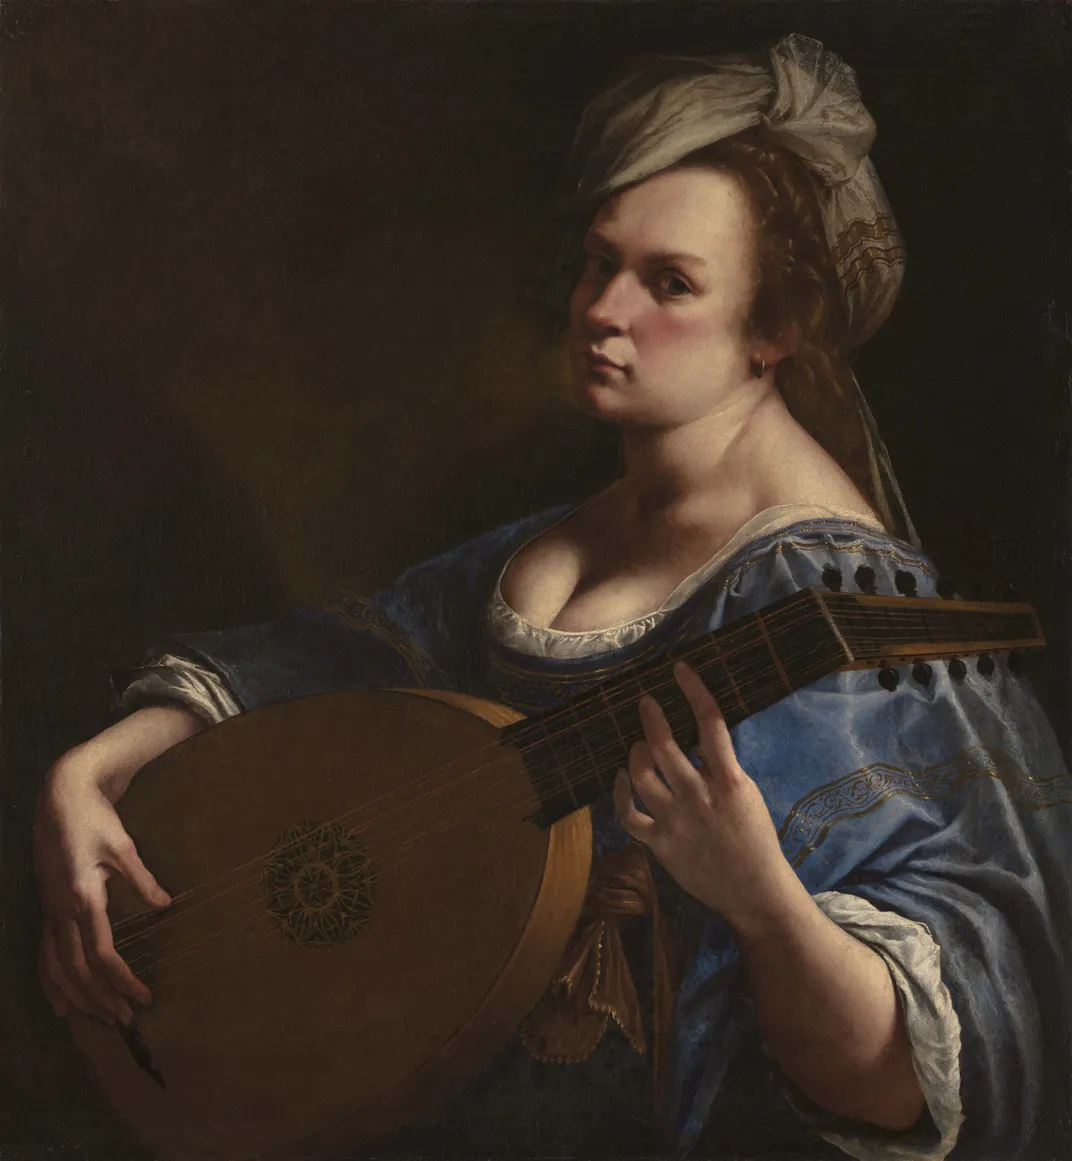 A self portrait of a woman in a blue dress holding a lute and gazing intently at the viewer